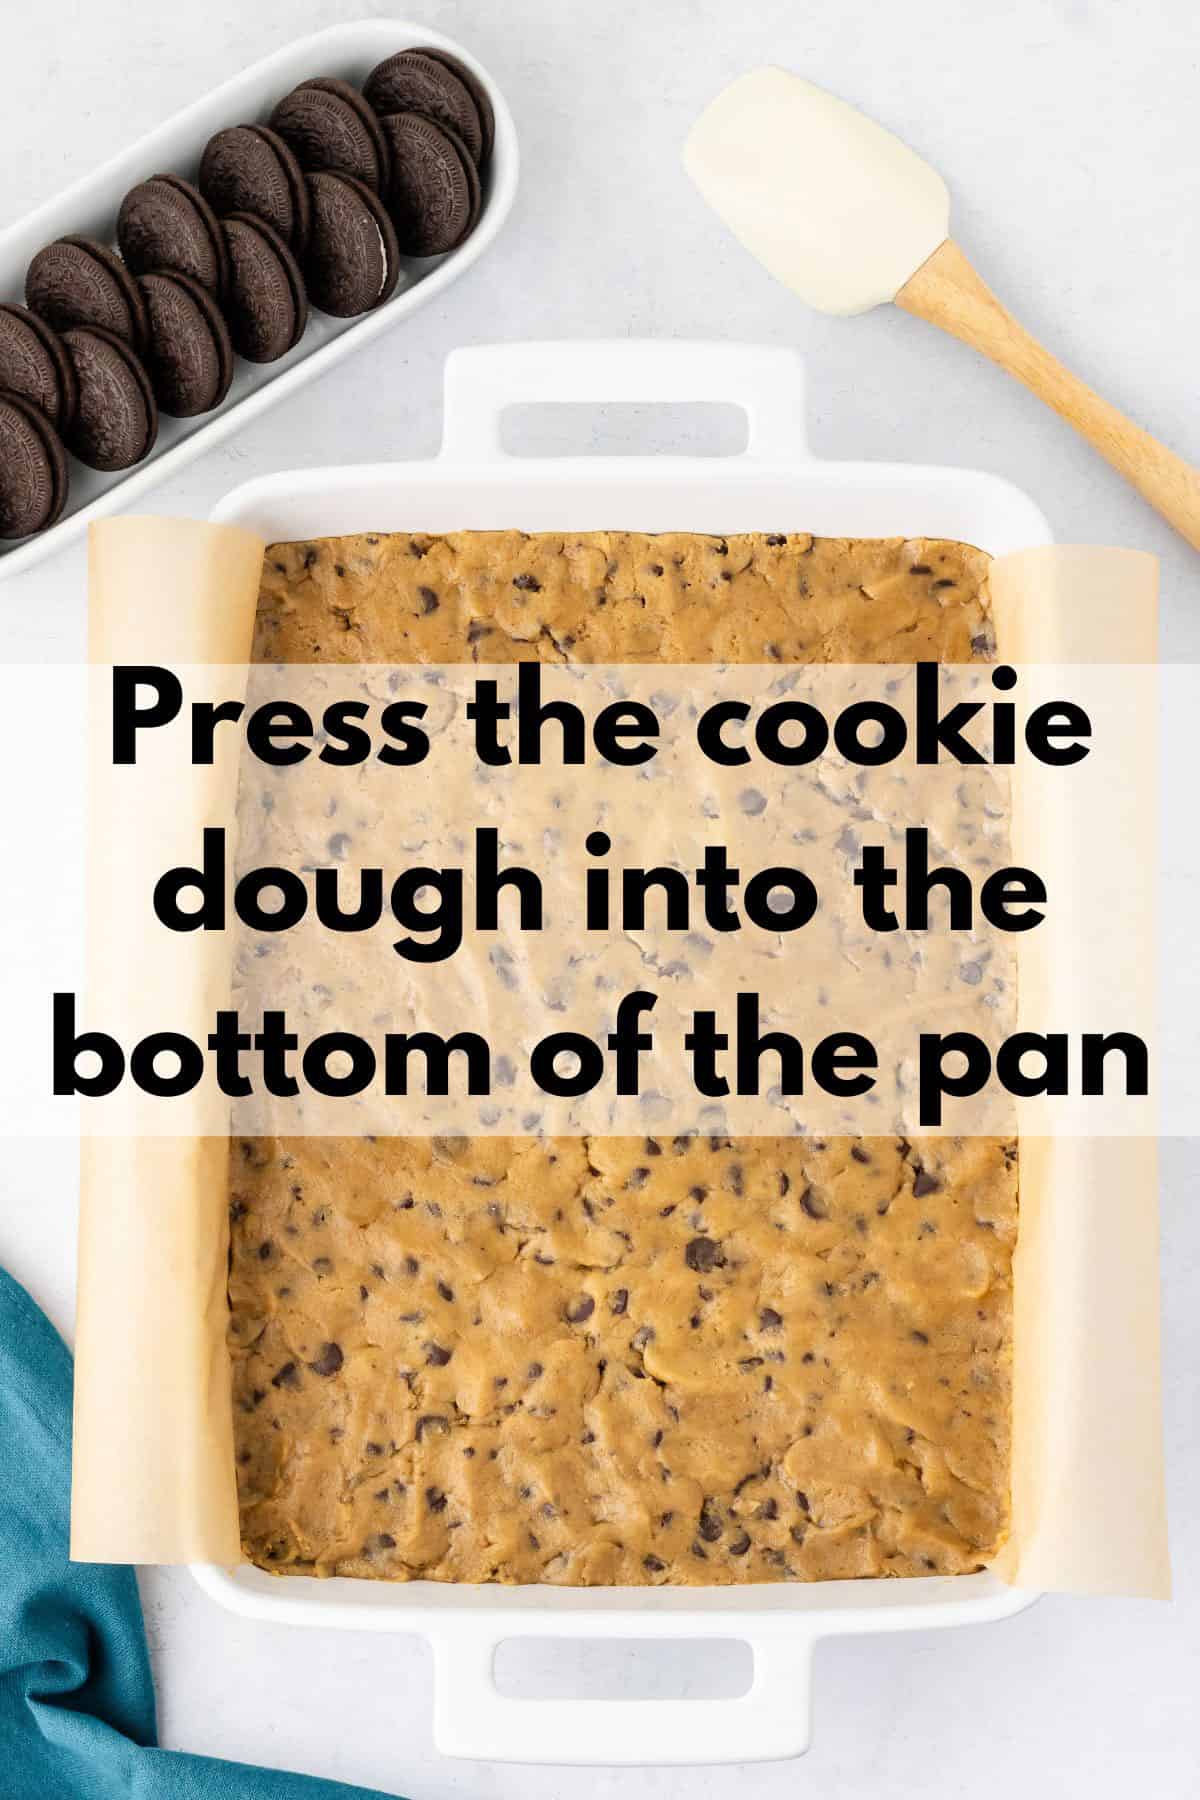 Some cookie dough in a pan.